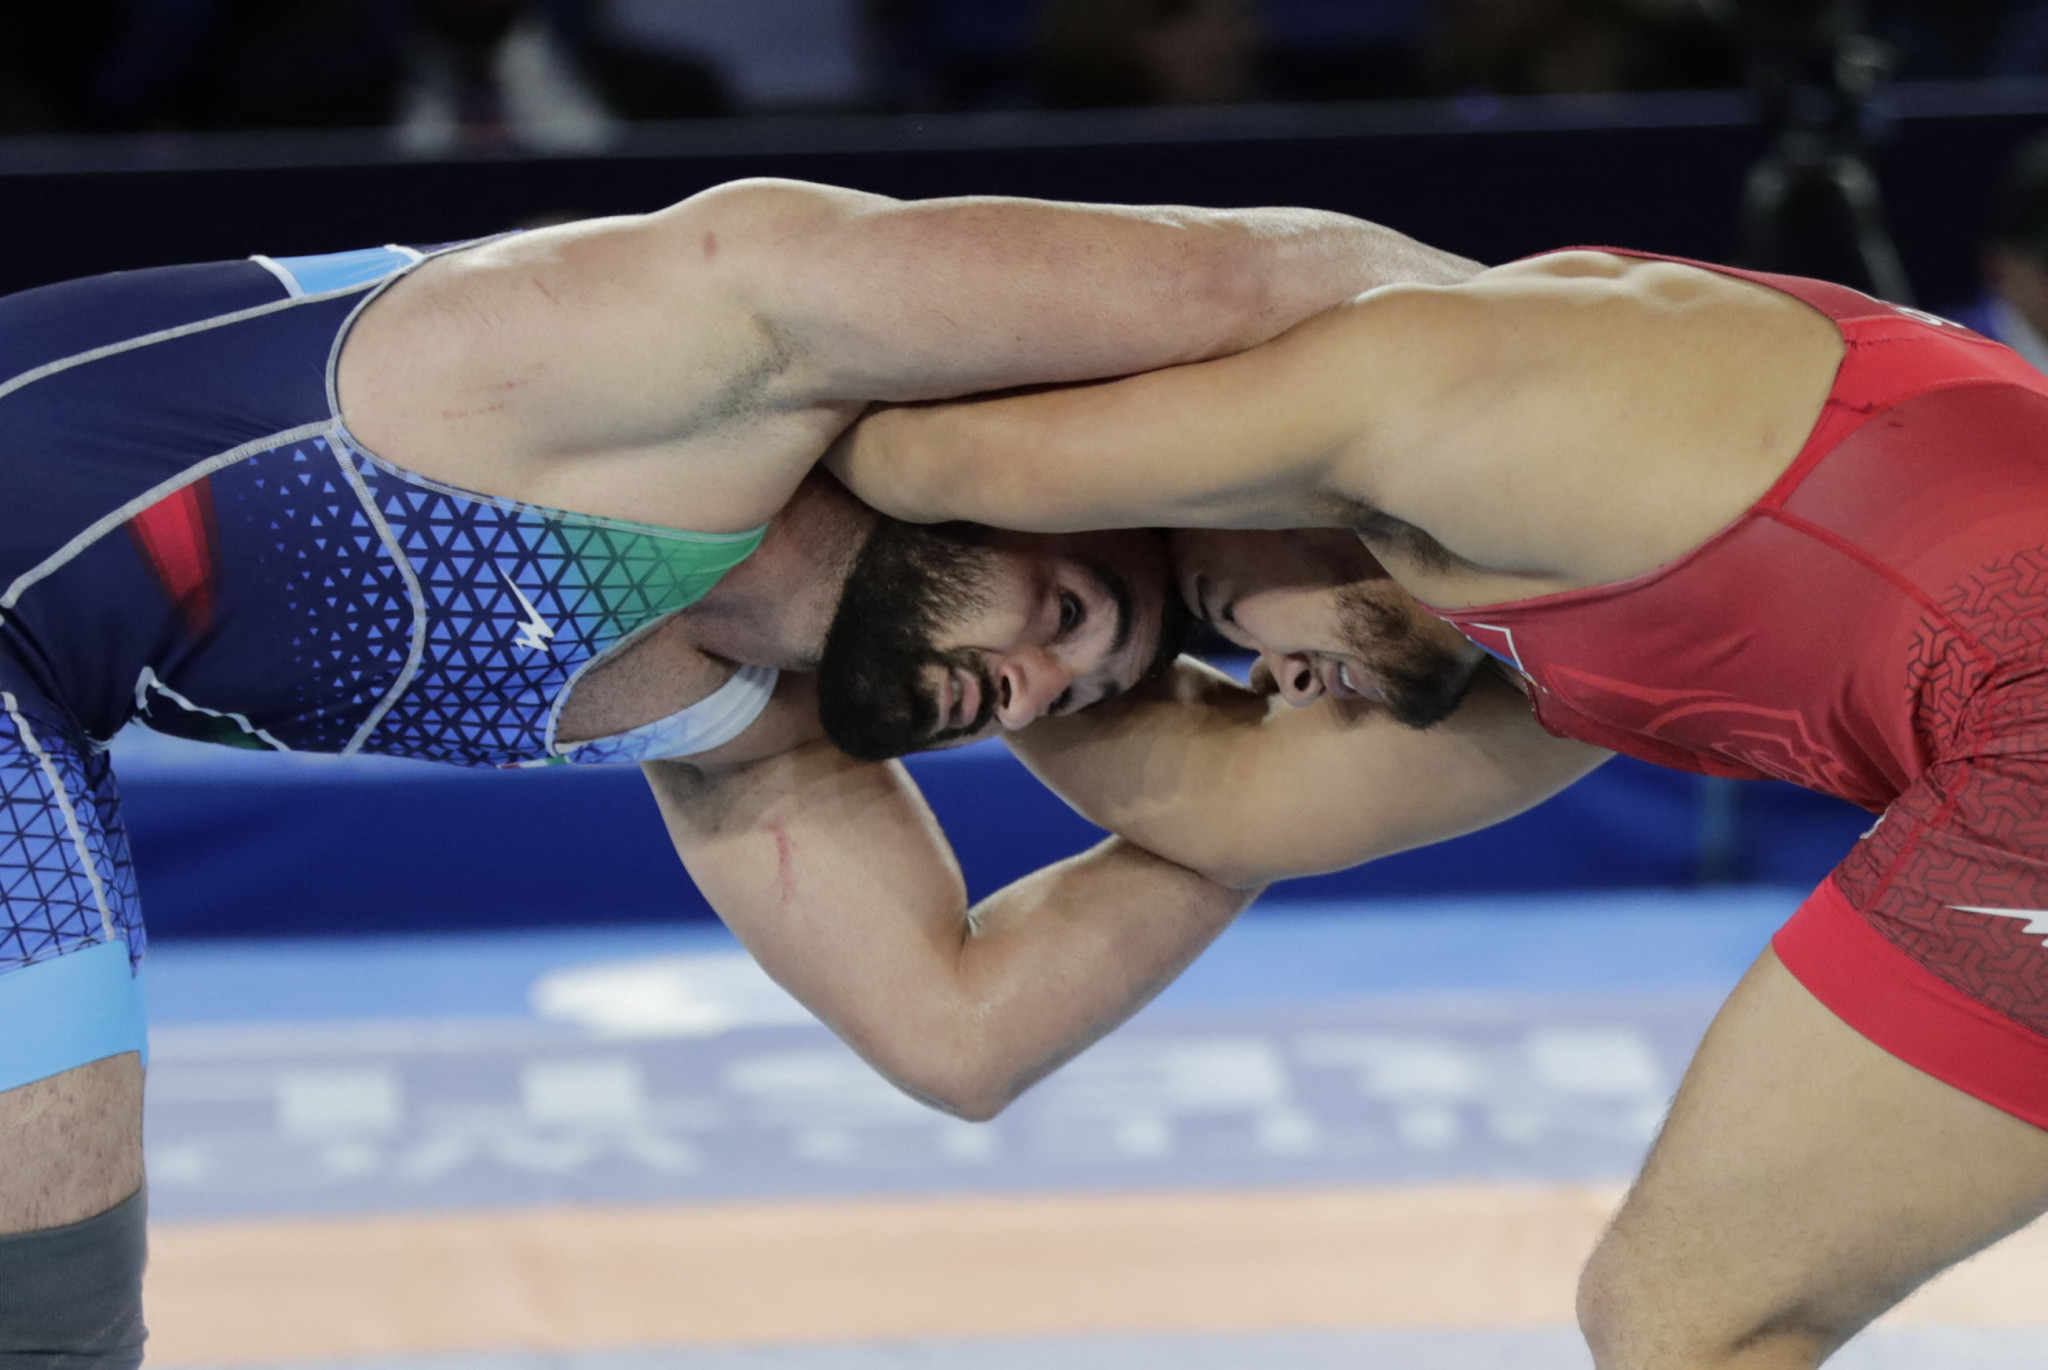 Zagreb is set to host the 2023 European Wrestling Championships ©Getty Images